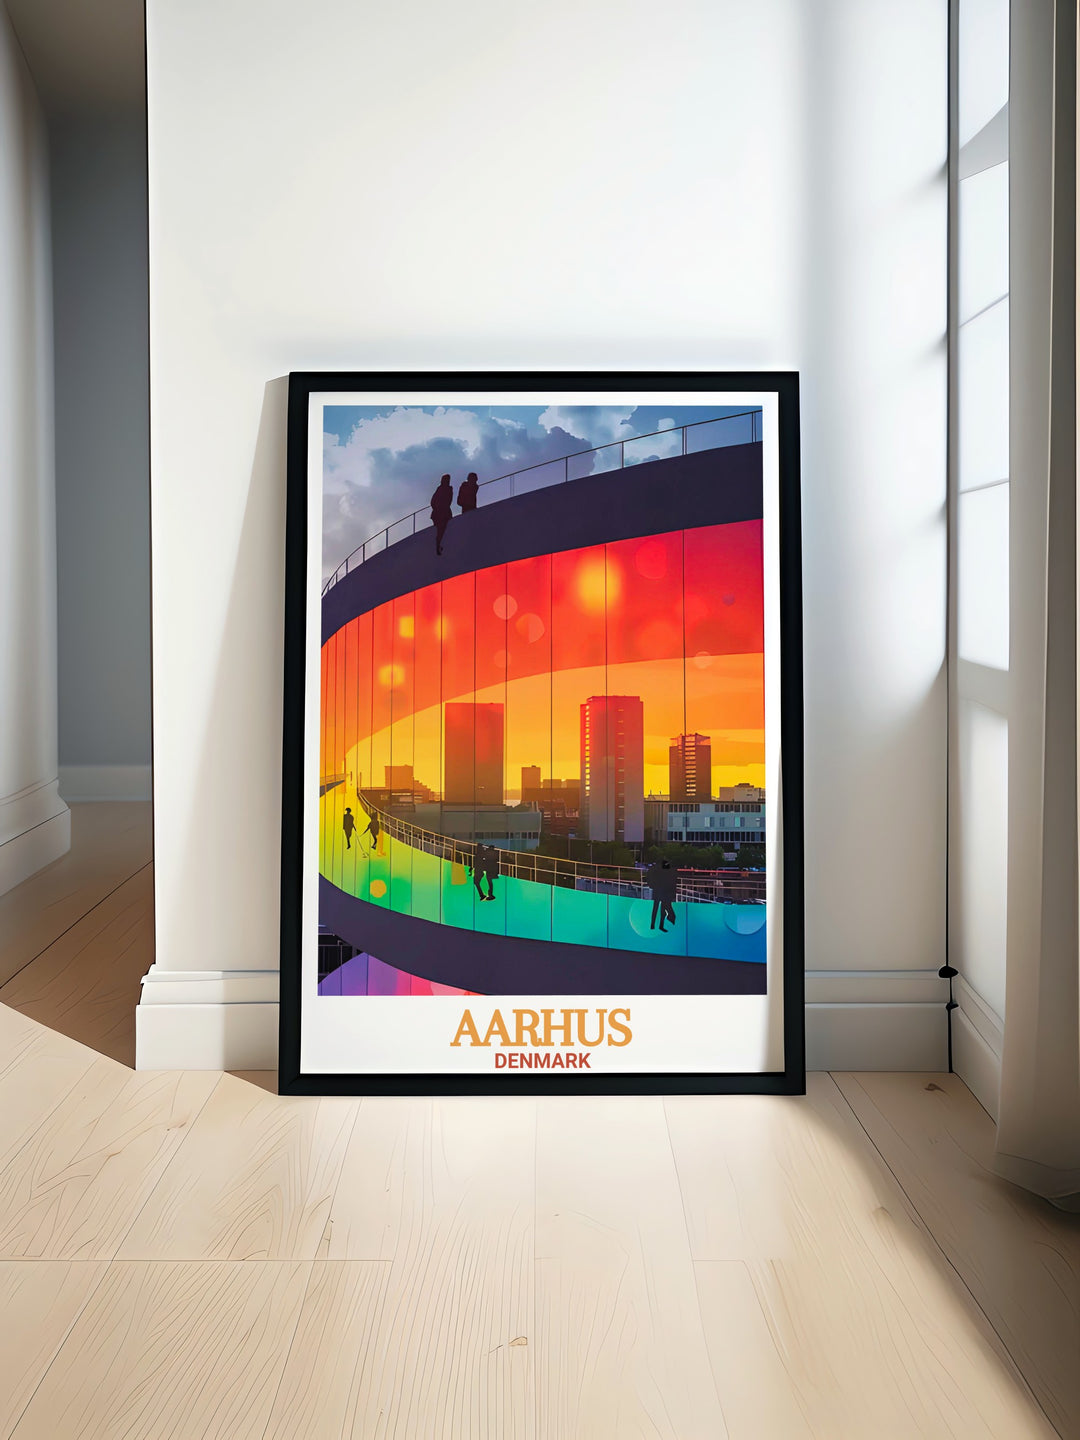 ARoS Aarhus Art Museum travel poster featuring the stunning architecture and modern art exhibits of Denmarks renowned museum perfect for Aarhus gifts and Denmark wall art enthusiasts. This print brings a touch of Danish culture to your home decor.